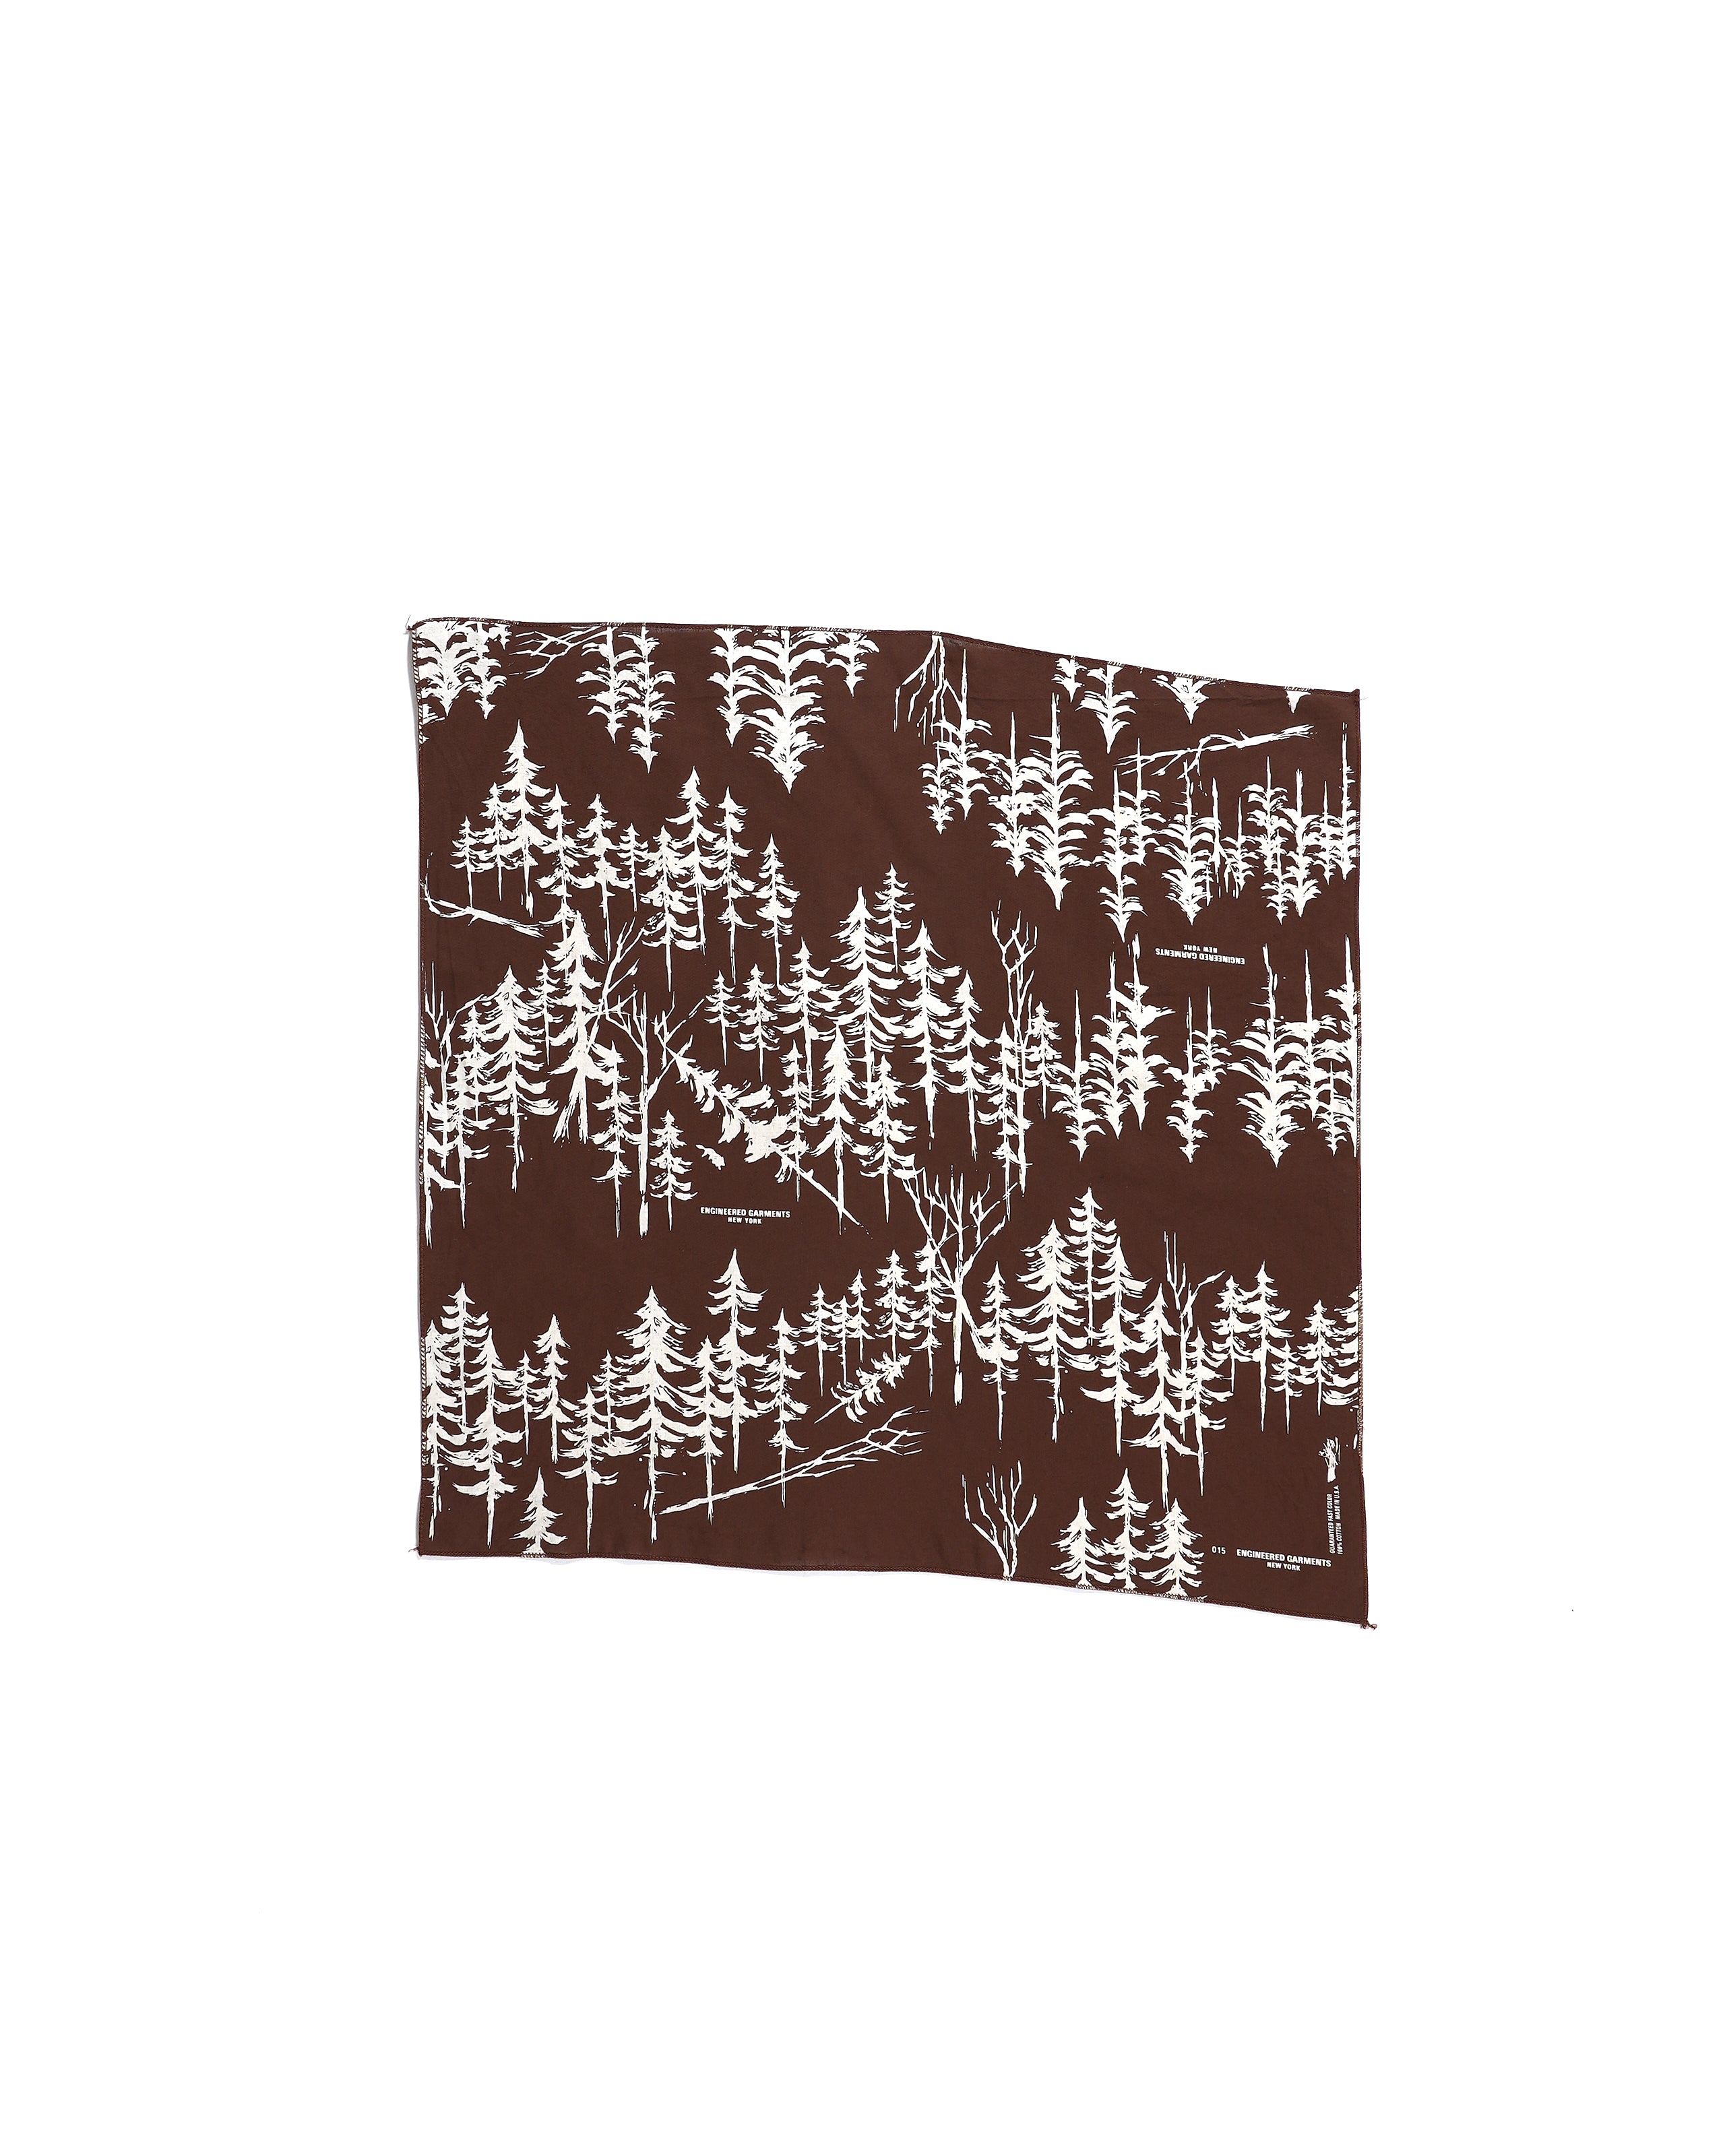 Printed Bandana - Brown / Forest